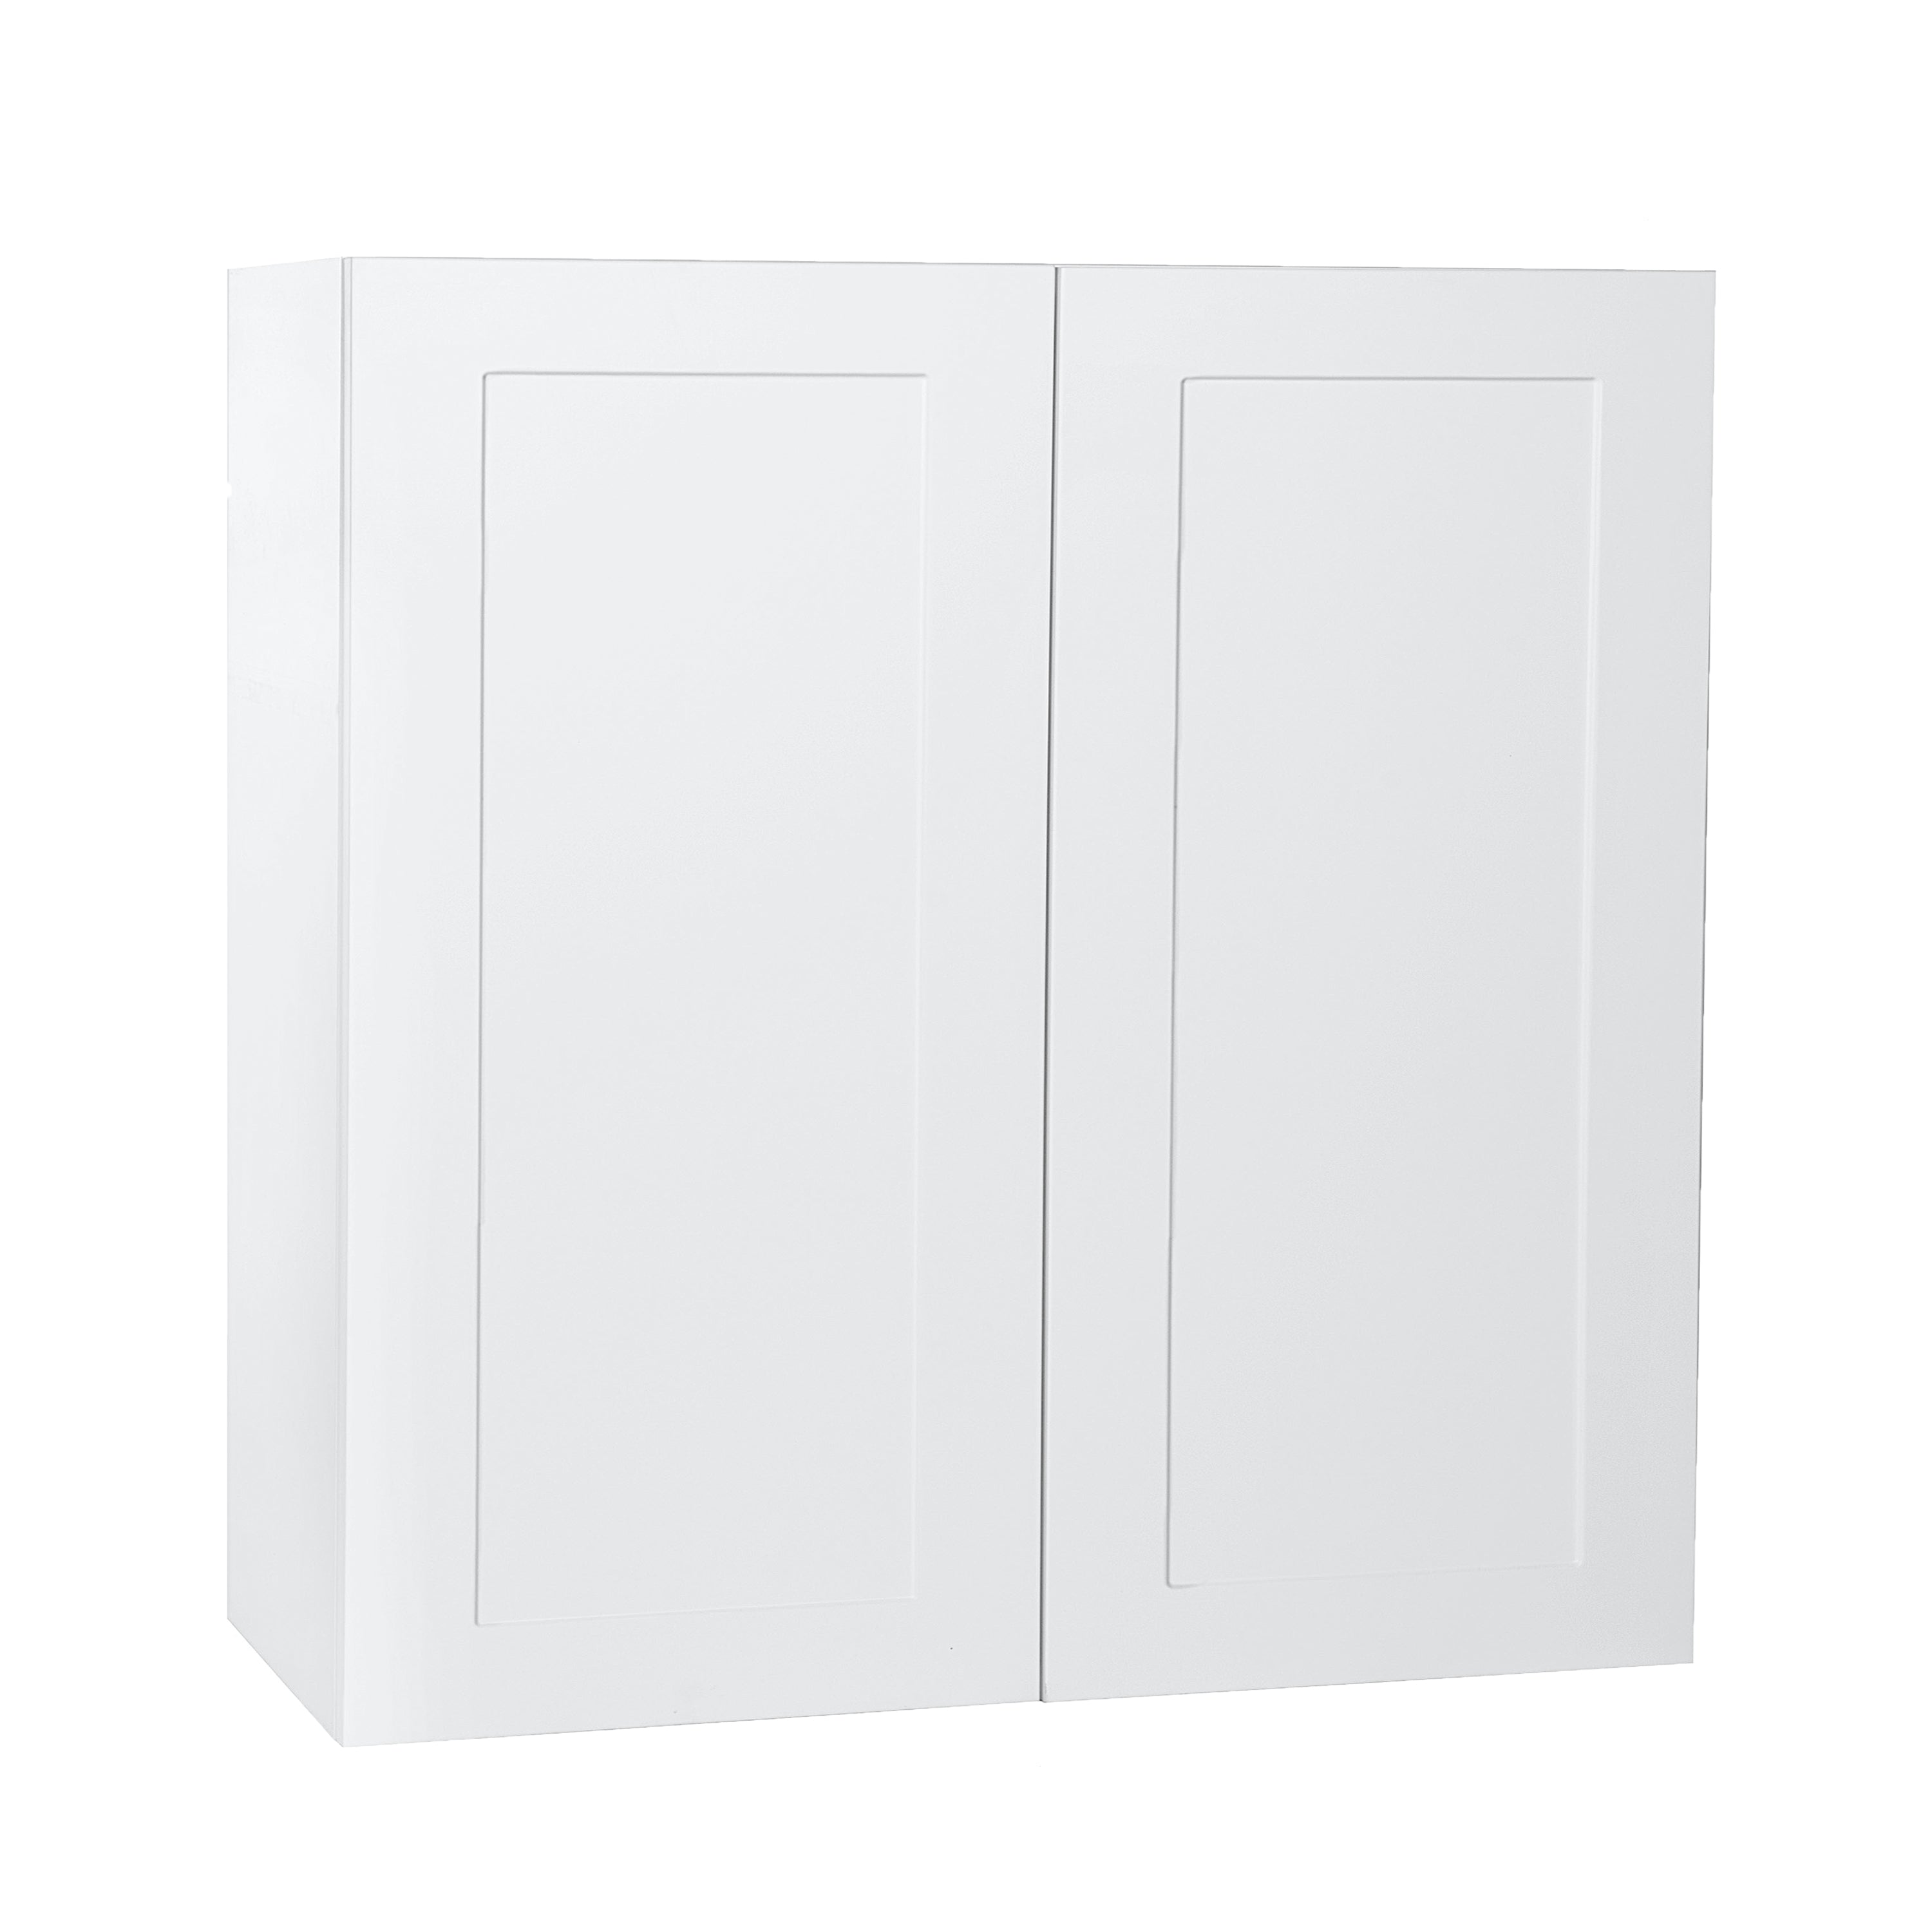 Quick Assemble Modern Style with Soft Close, White Shaker Wall Kitchen Cabinet, 2 Door (33 in W x 12 D x 36 in H) -  Pro-Edge HD